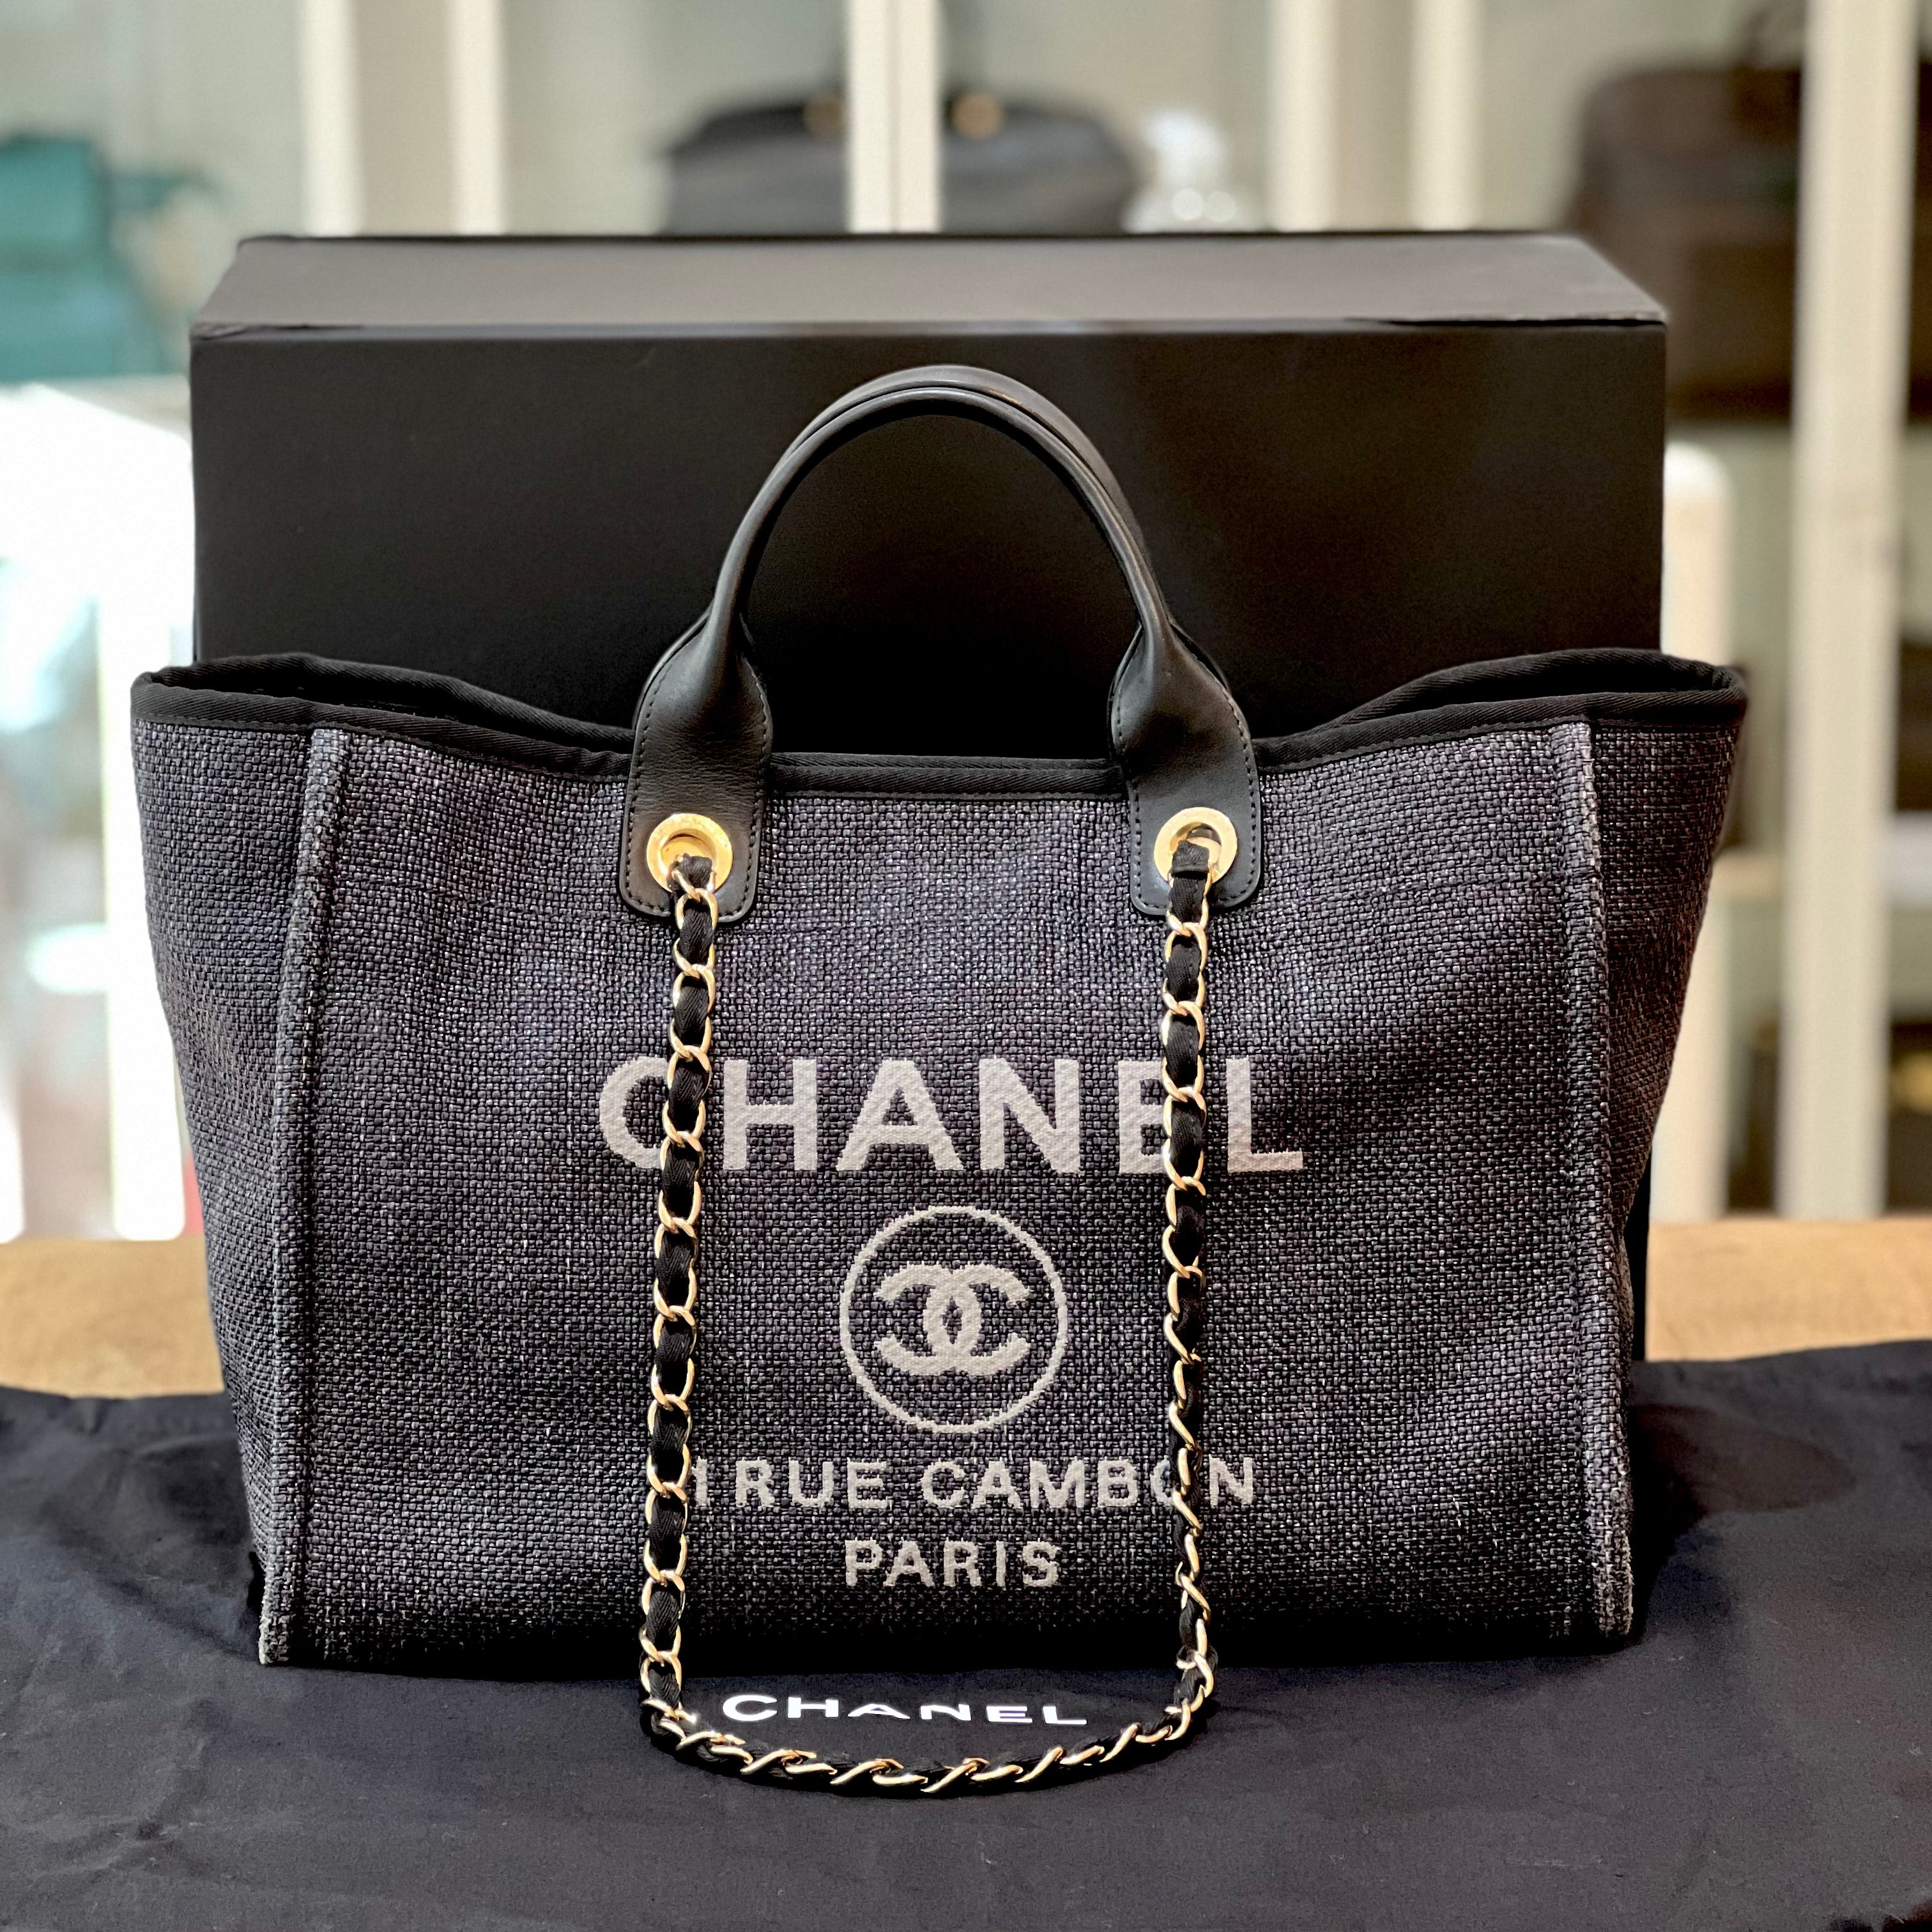 Chanel Deauville Tote Look Alike